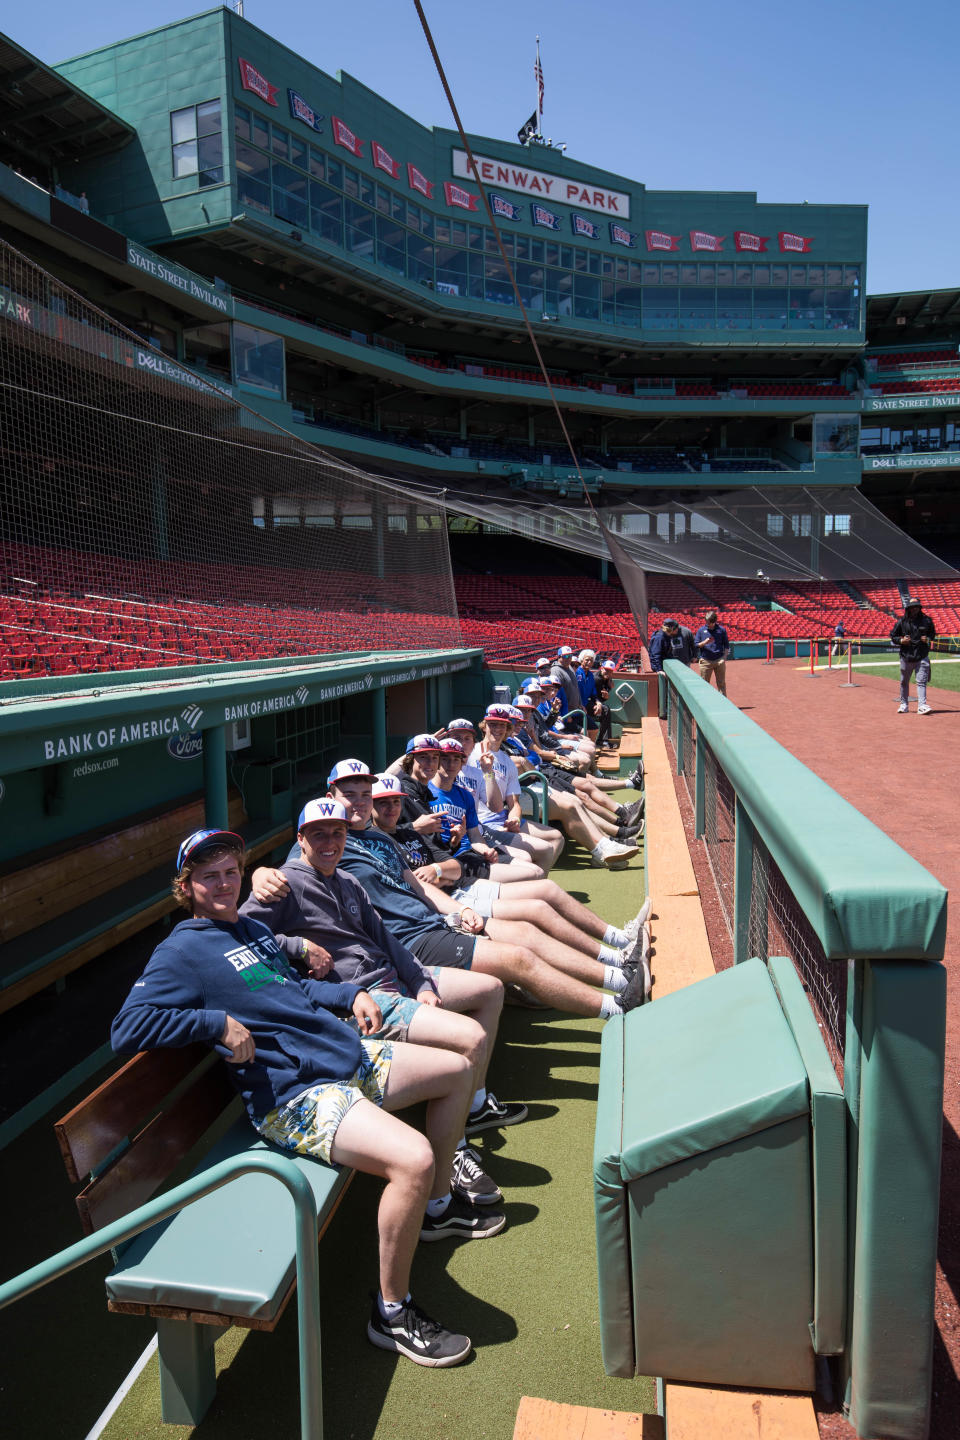 Members of the Winnacunnet High School baseball team take a seat in the Boston Red Sox dugout during Friday's batting practice session at Fenway Park.